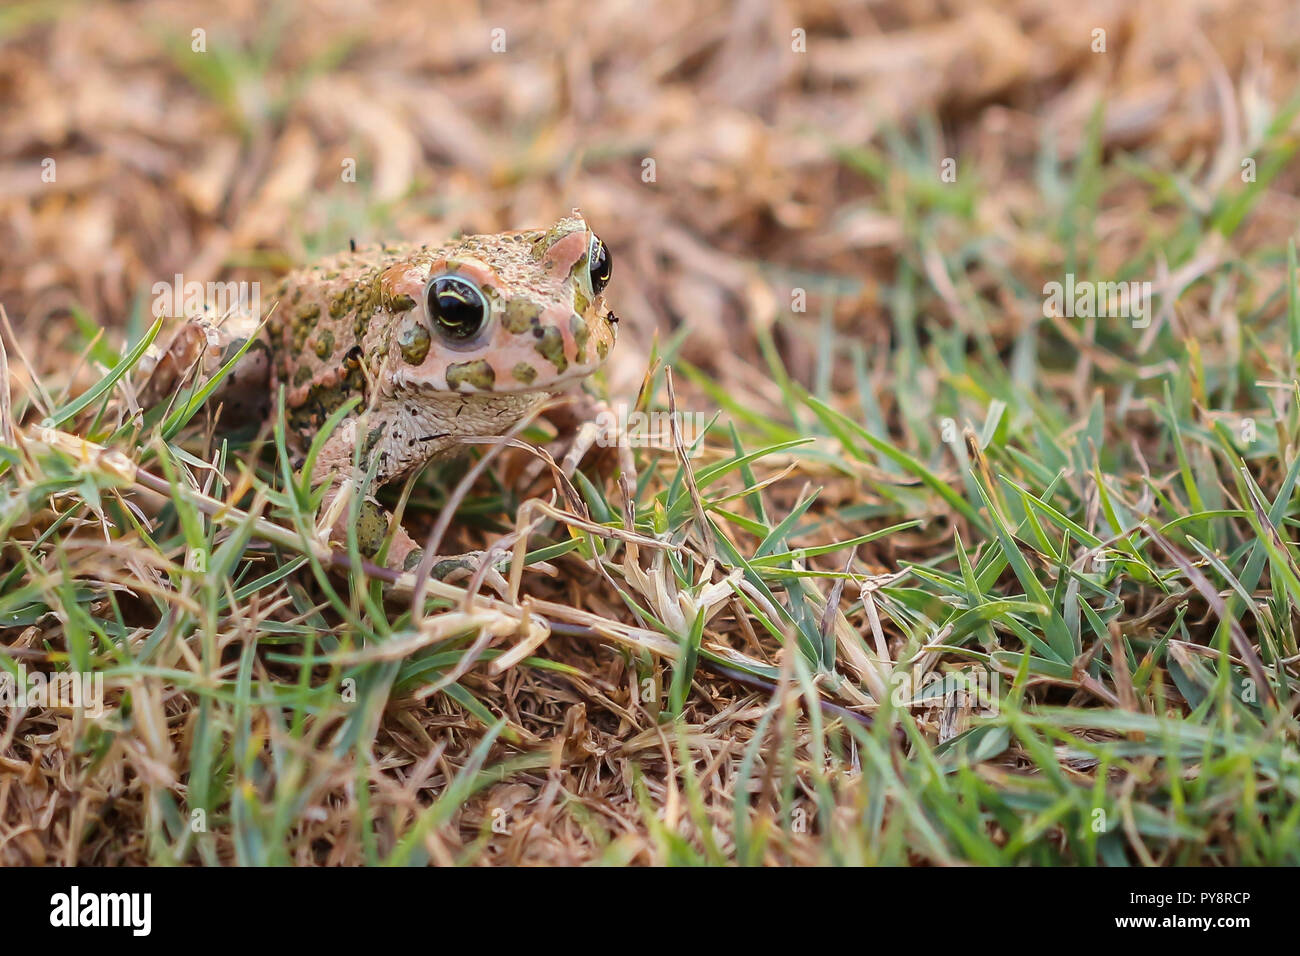 A closed photo of small frog on grass Stock Photo